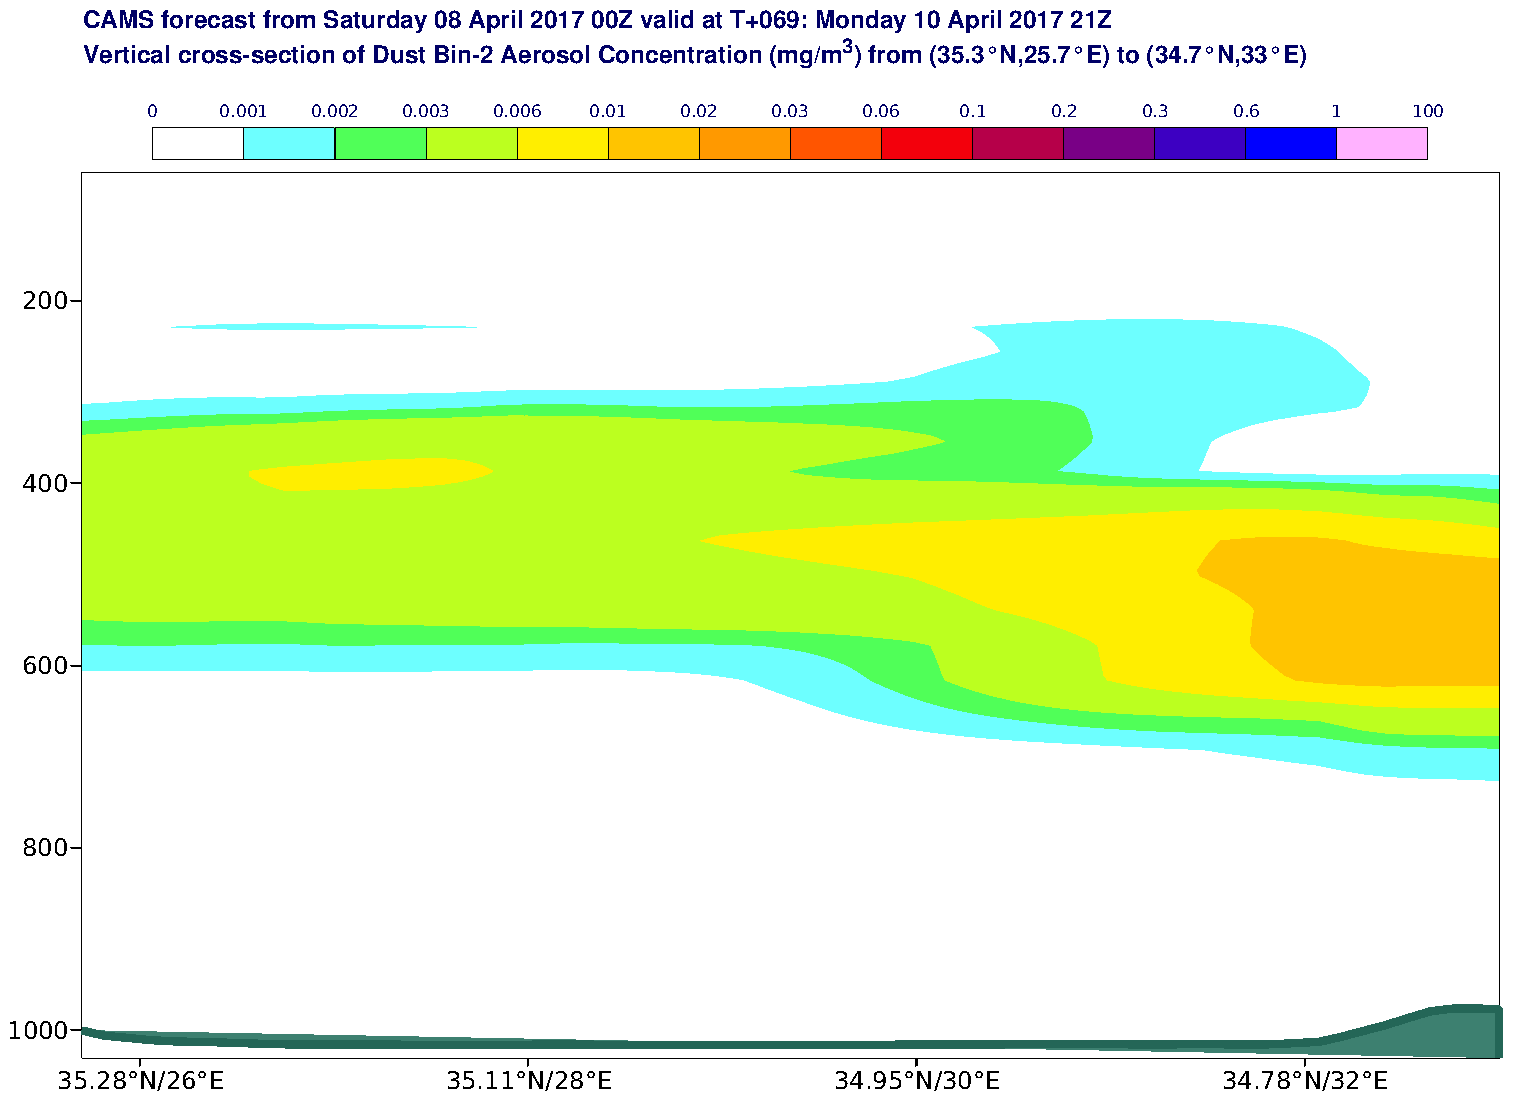 Vertical cross-section of Dust Bin-2 Aerosol Concentration (mg/m3) valid at T69 - 2017-04-10 21:00